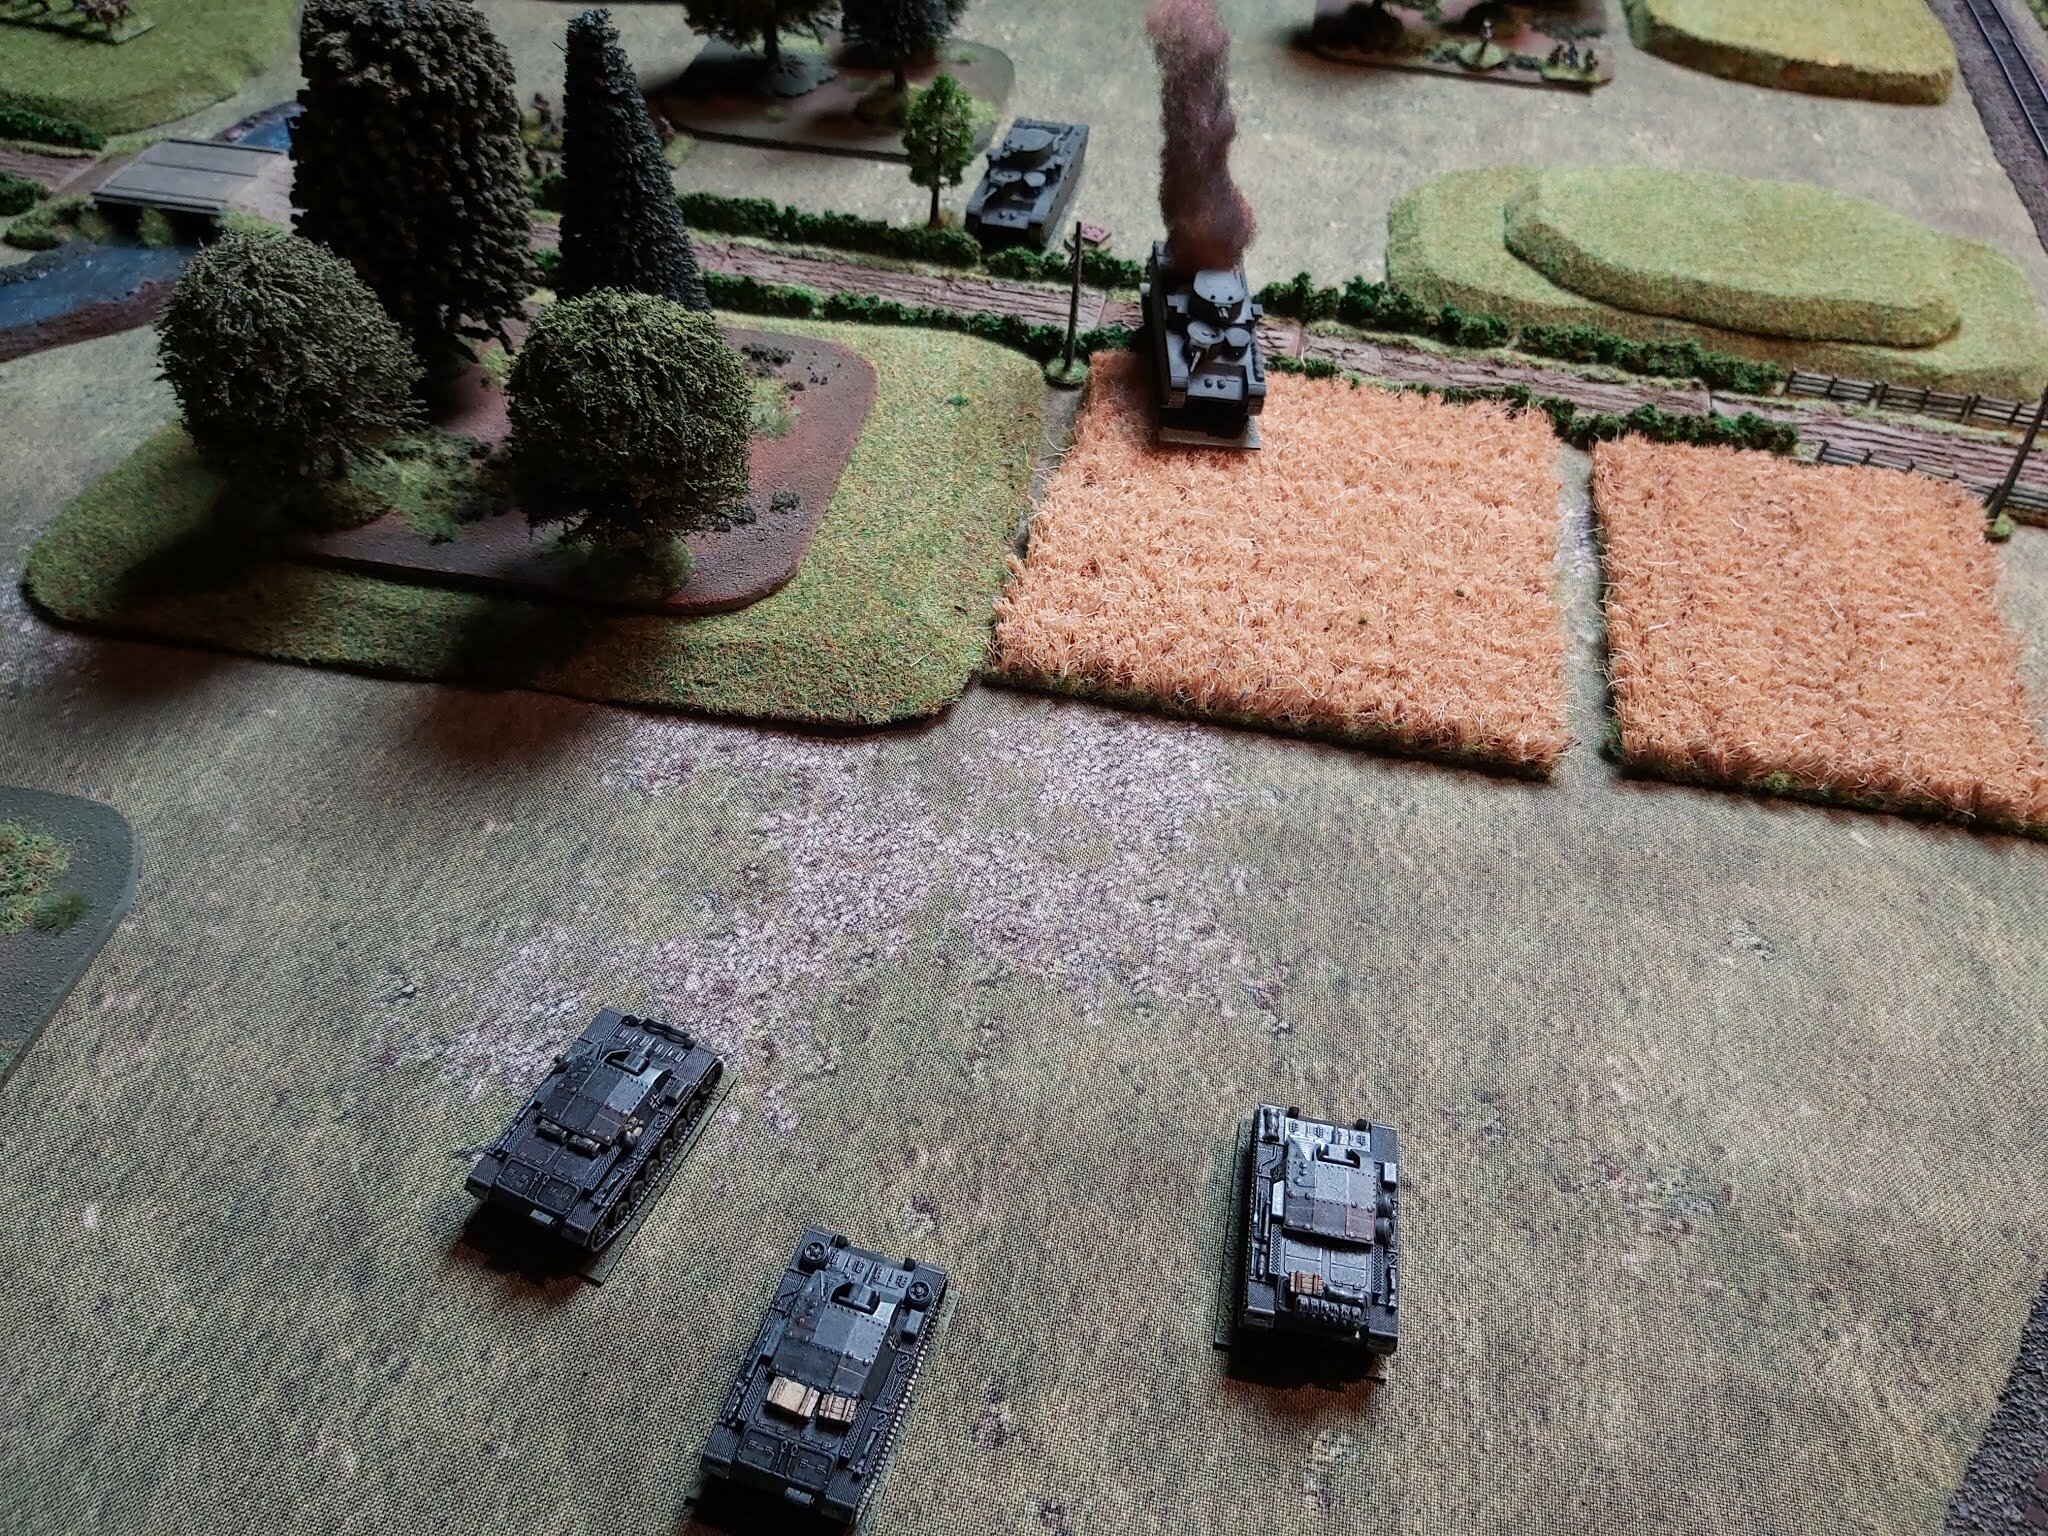 Over on the other flank, the StuGs opened their engines and guns, immediately taking out the leading T-35 and knocking out the main gun of the second one!